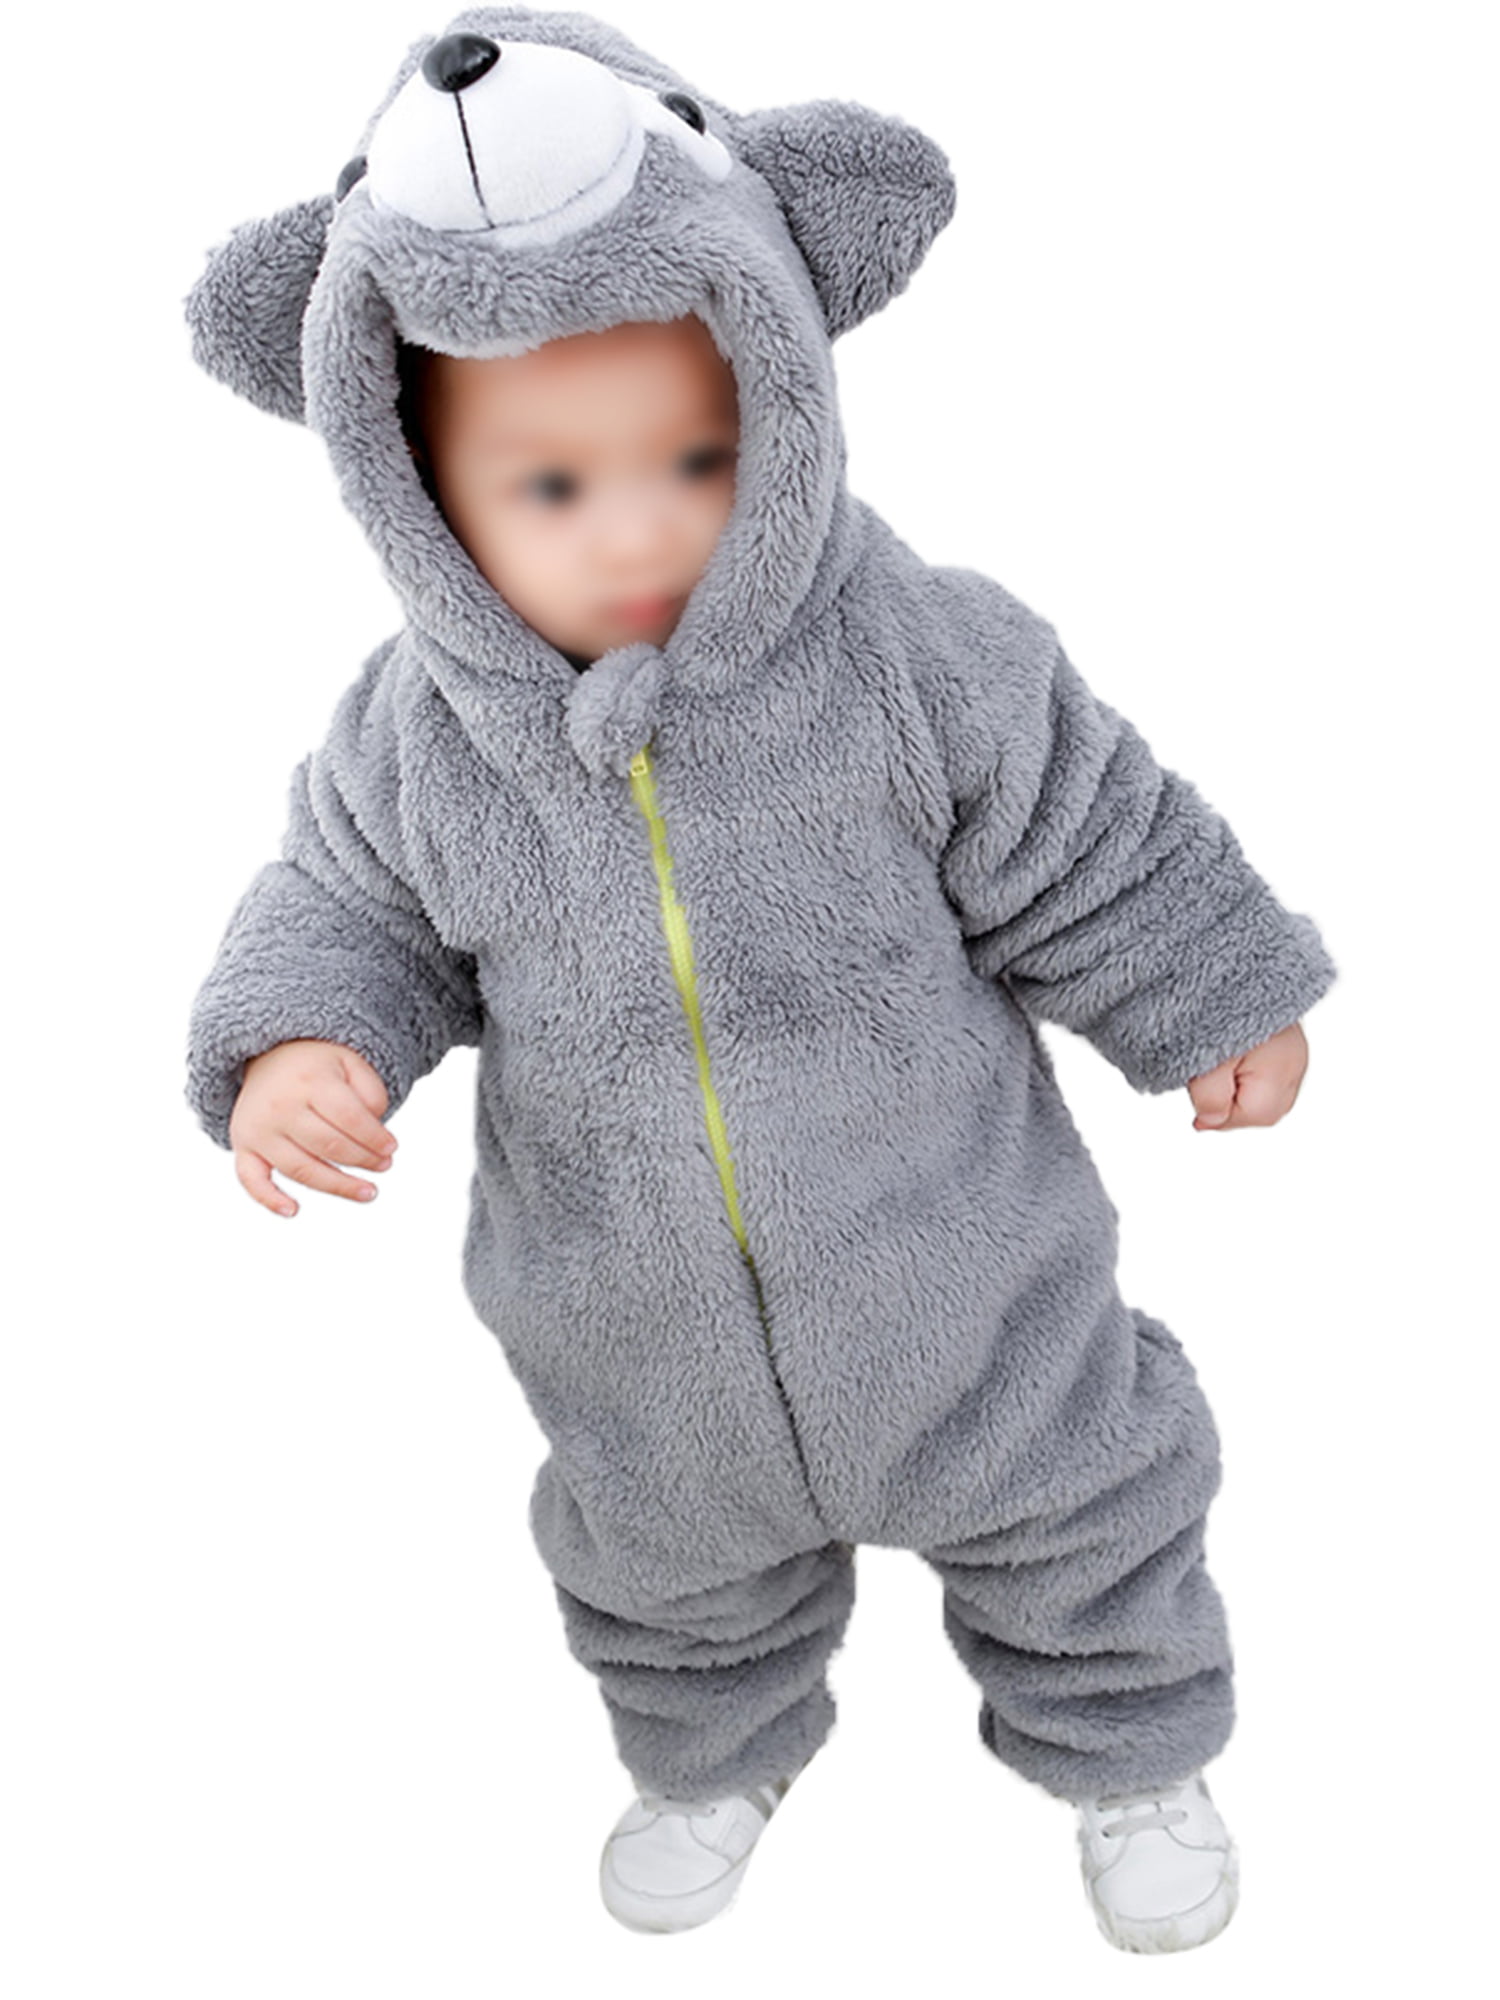 Baby Boys Girls Clothes Cartoon Christmas Deer Hooded Romper Jumpsuit Outfits 